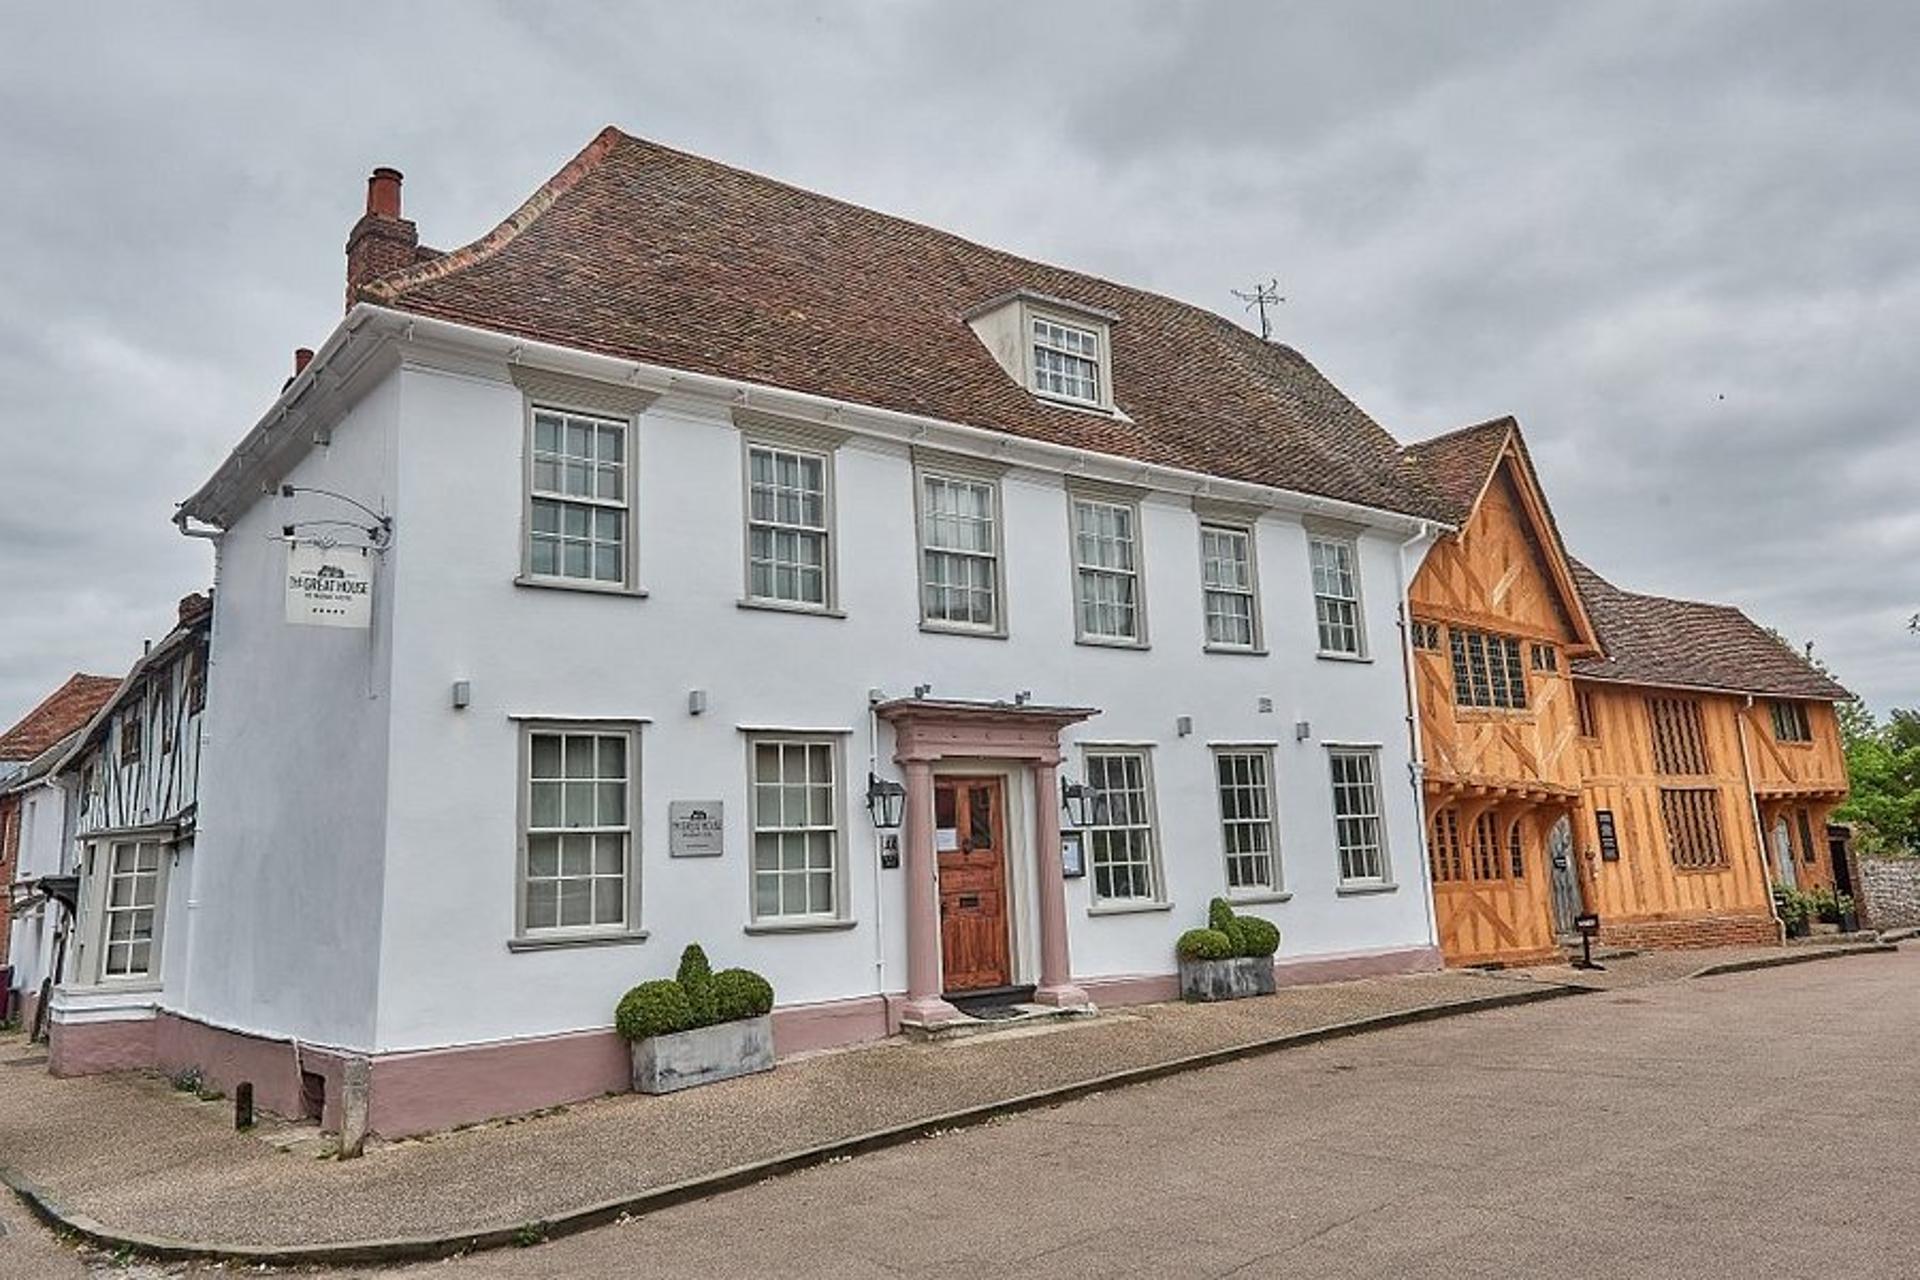 Grade II listed Lavenham hotel and restaurant on the market for £1.45m